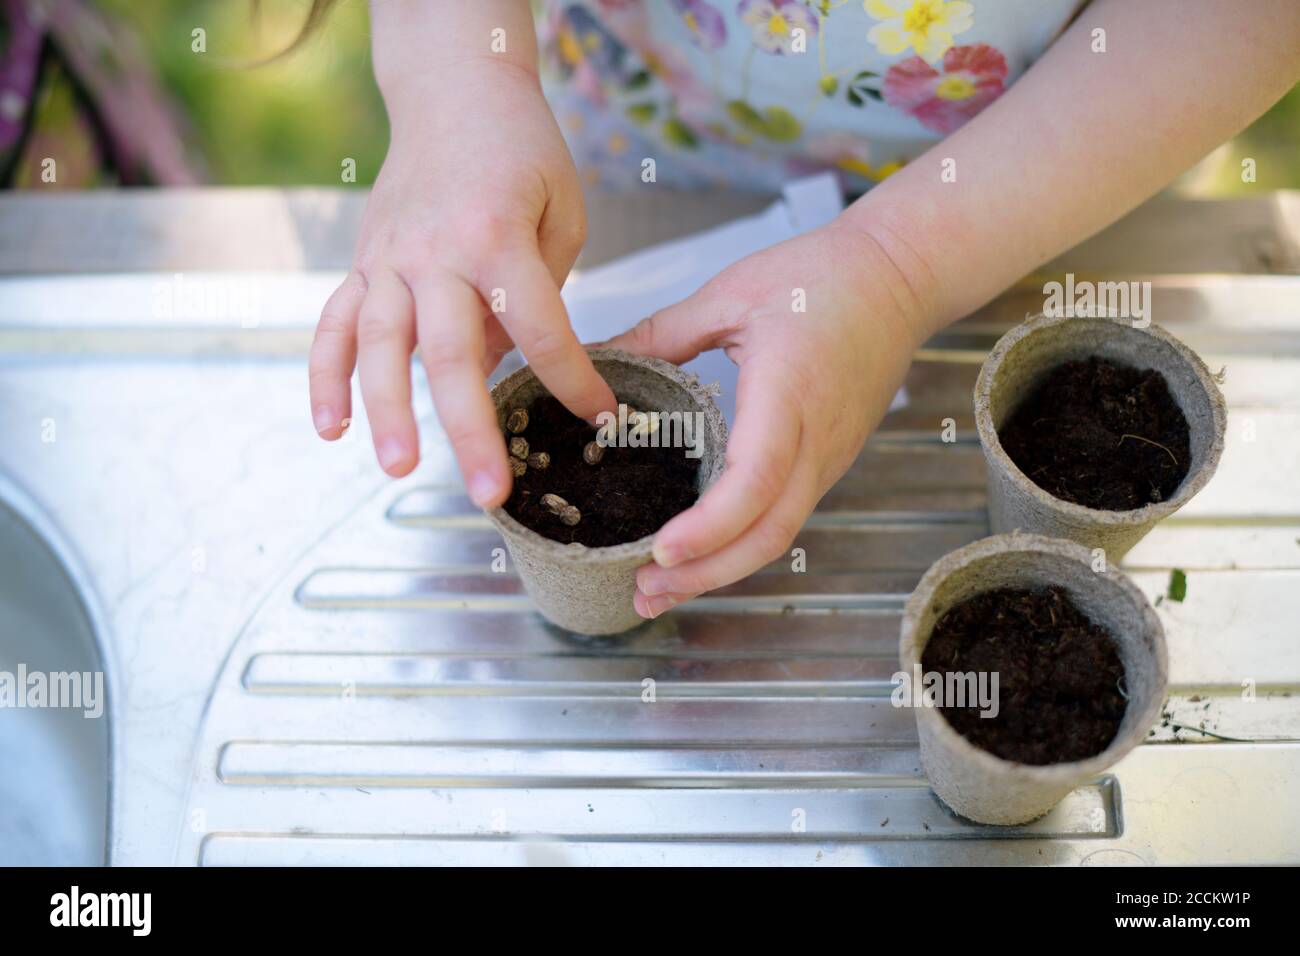 Girl's hands planting seeds in small pots on table at garden Stock Photo